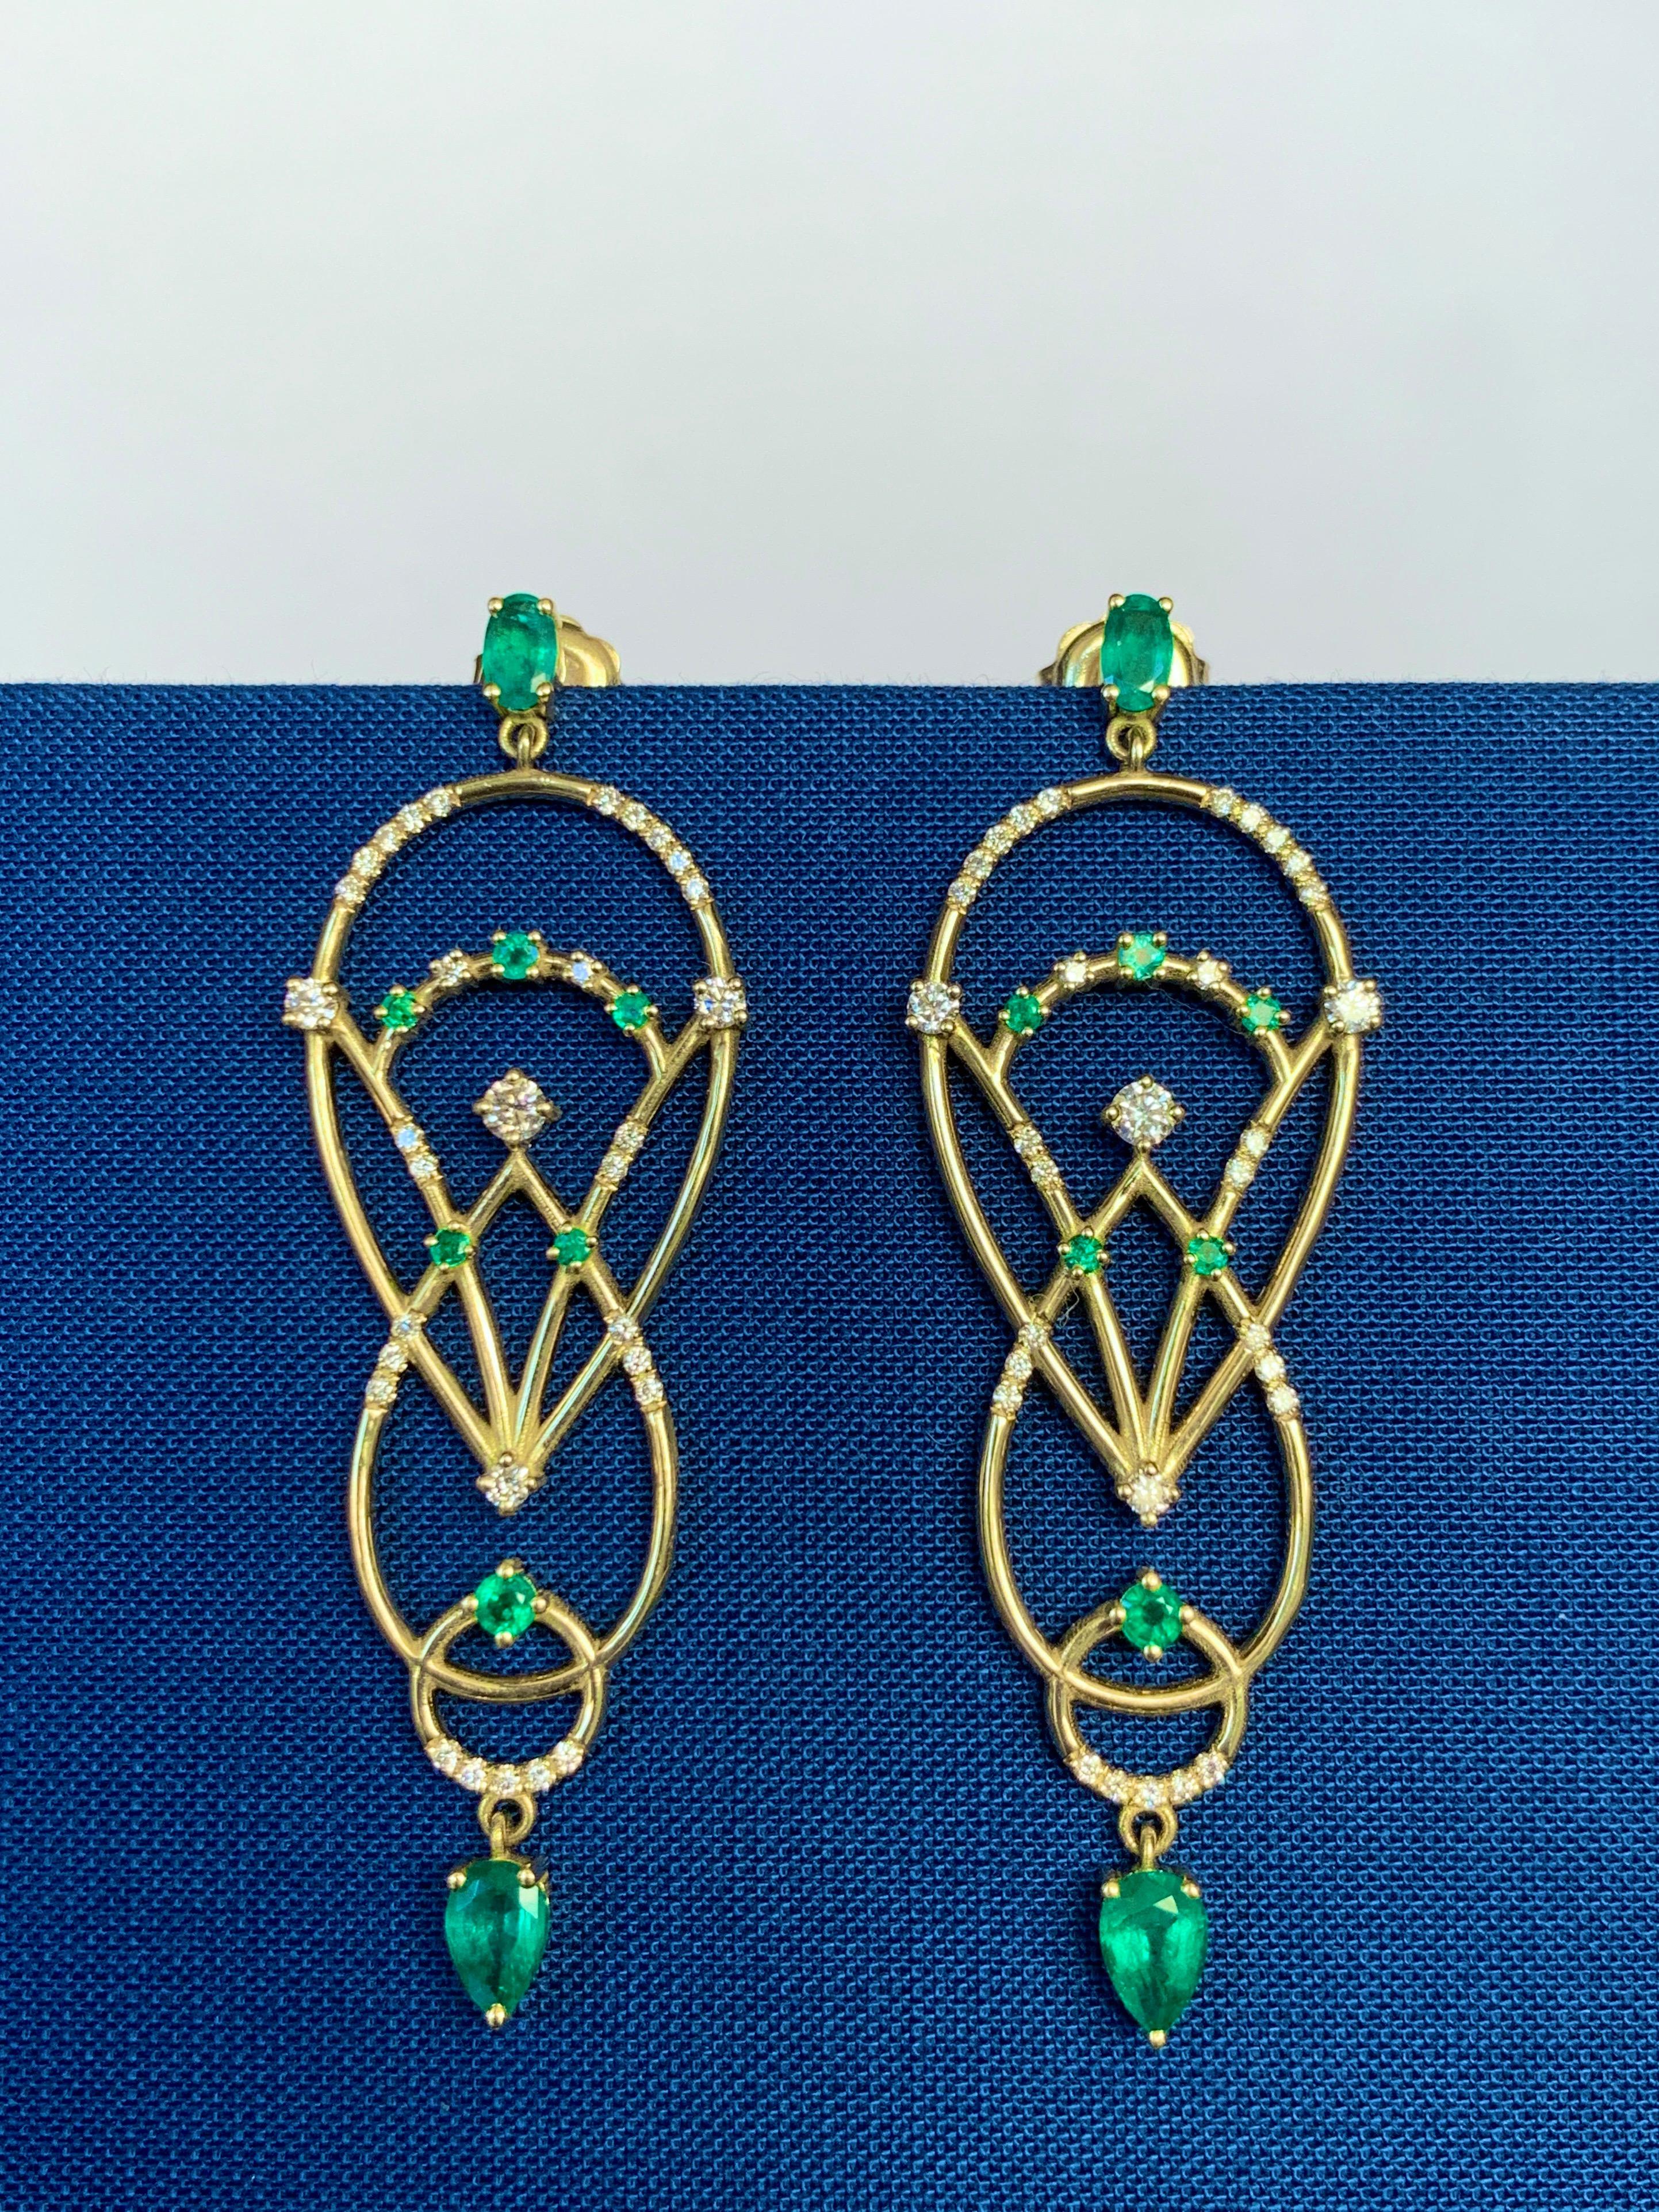 Designer: Alexia Gryllaki
Dimensions: L56x18mm
Weight: approximately 10.7g (pair)
Barcode: ING026E

The Interlocking Geometry earrings in 18 karat yellow gold with emeralds approx. 1.68cts and round brilliant-cut diamonds approx. 0.57cts.

About the